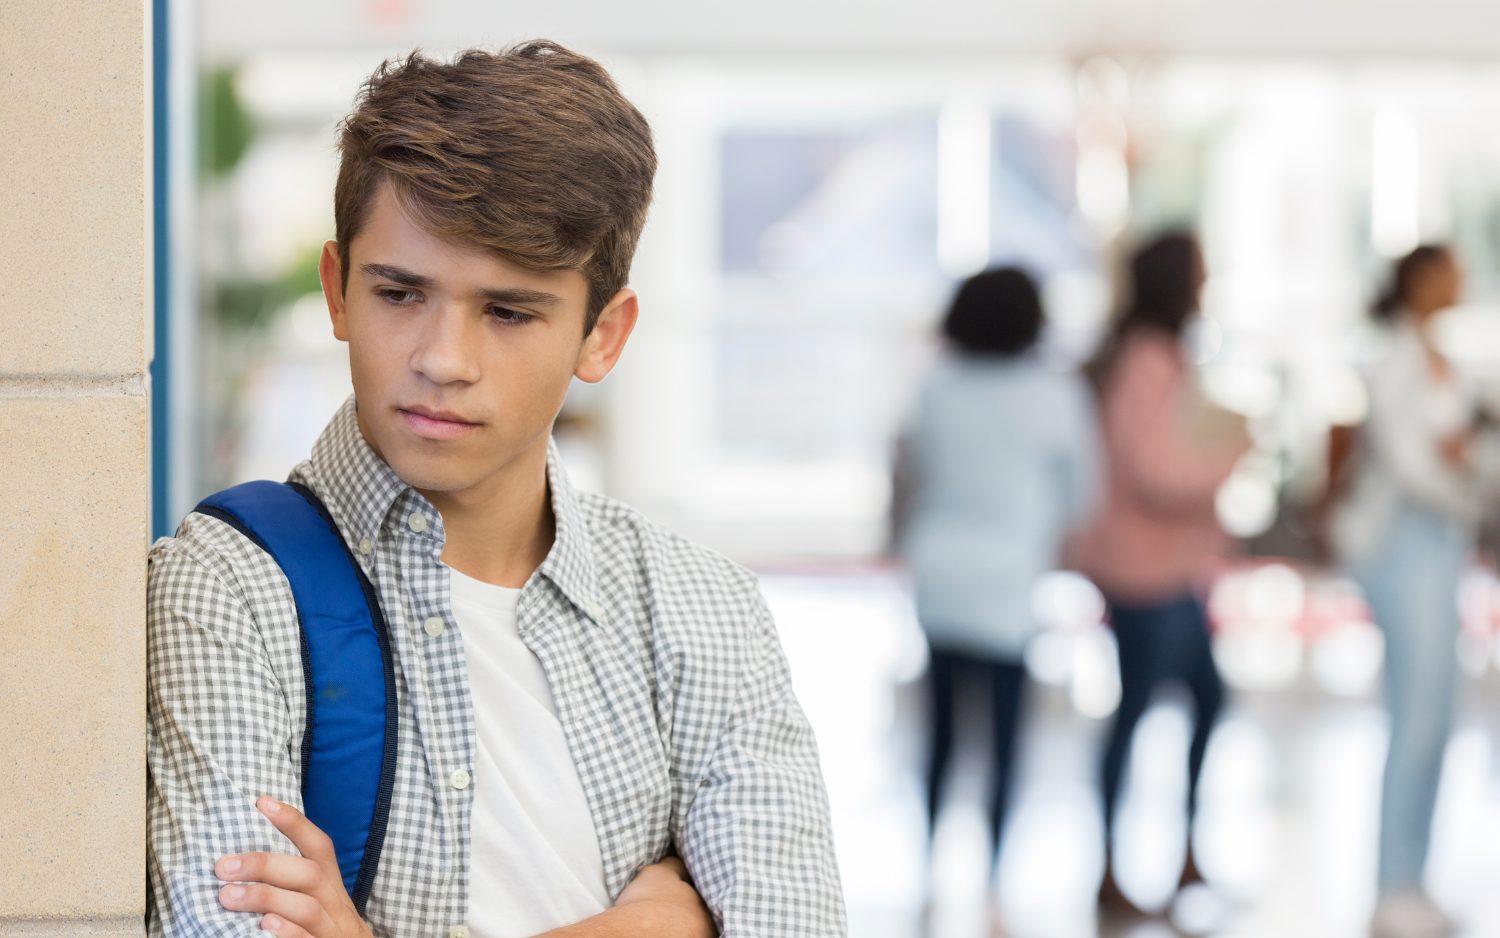 teen boy leaning against a wall at school looking depressed